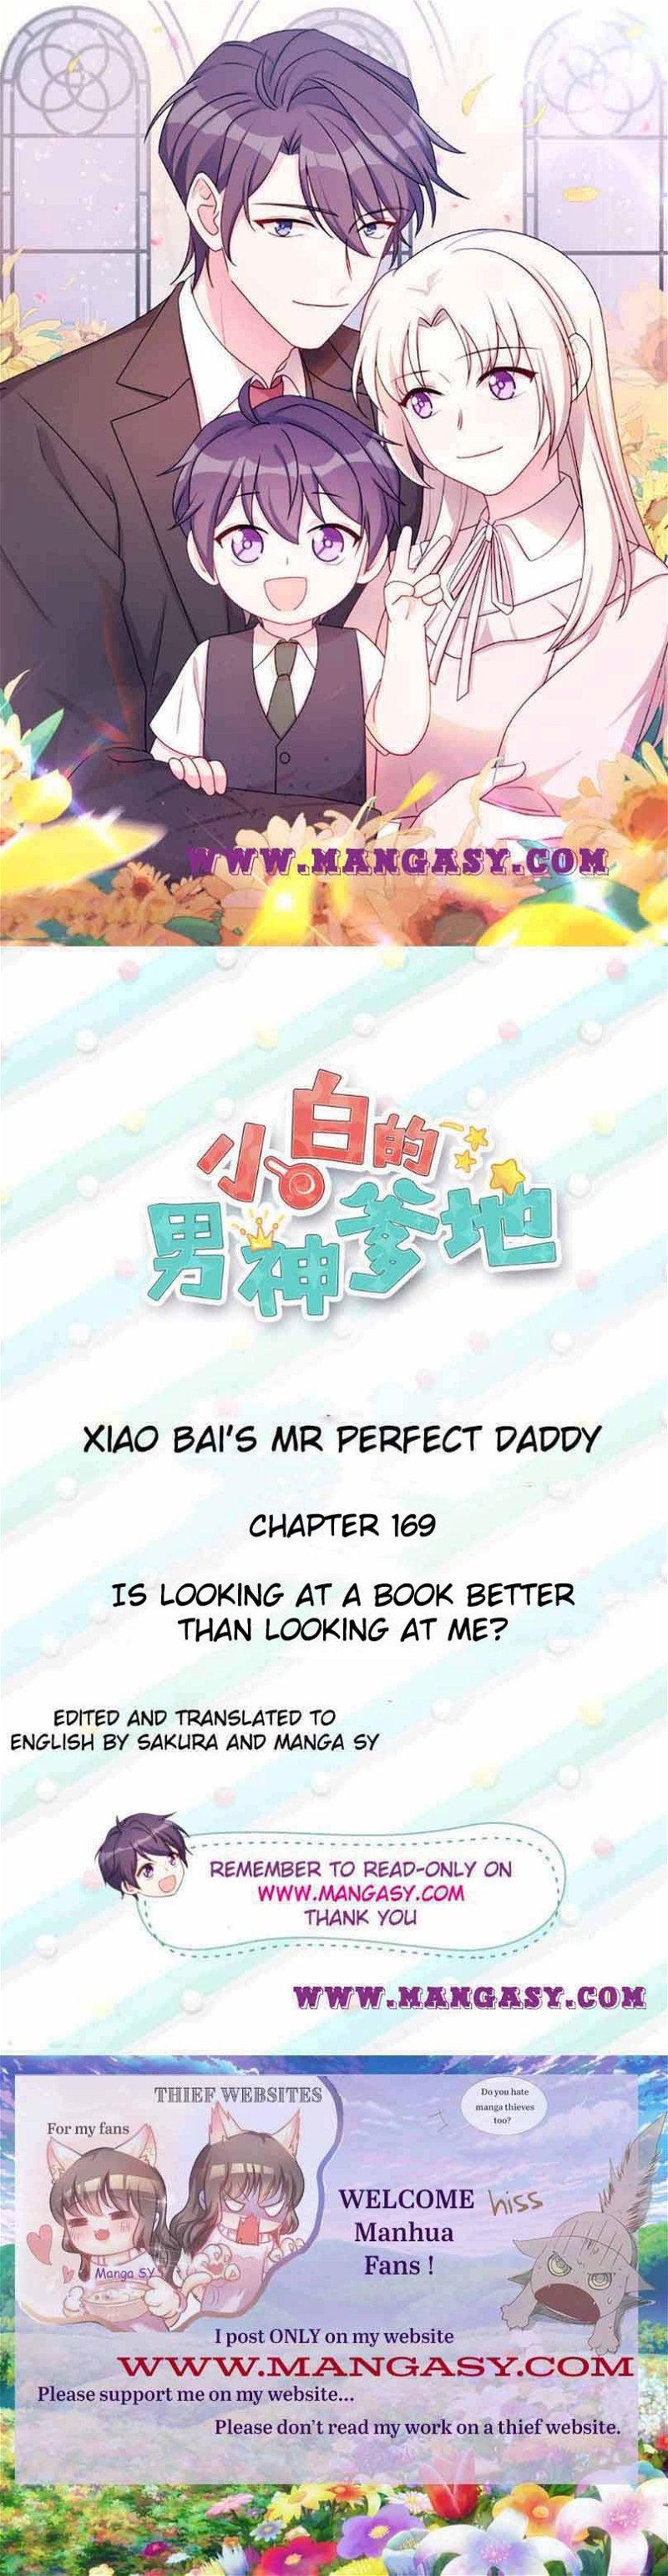 Xiao Bai’s father is a wonderful person Chapter 169 - Page 0